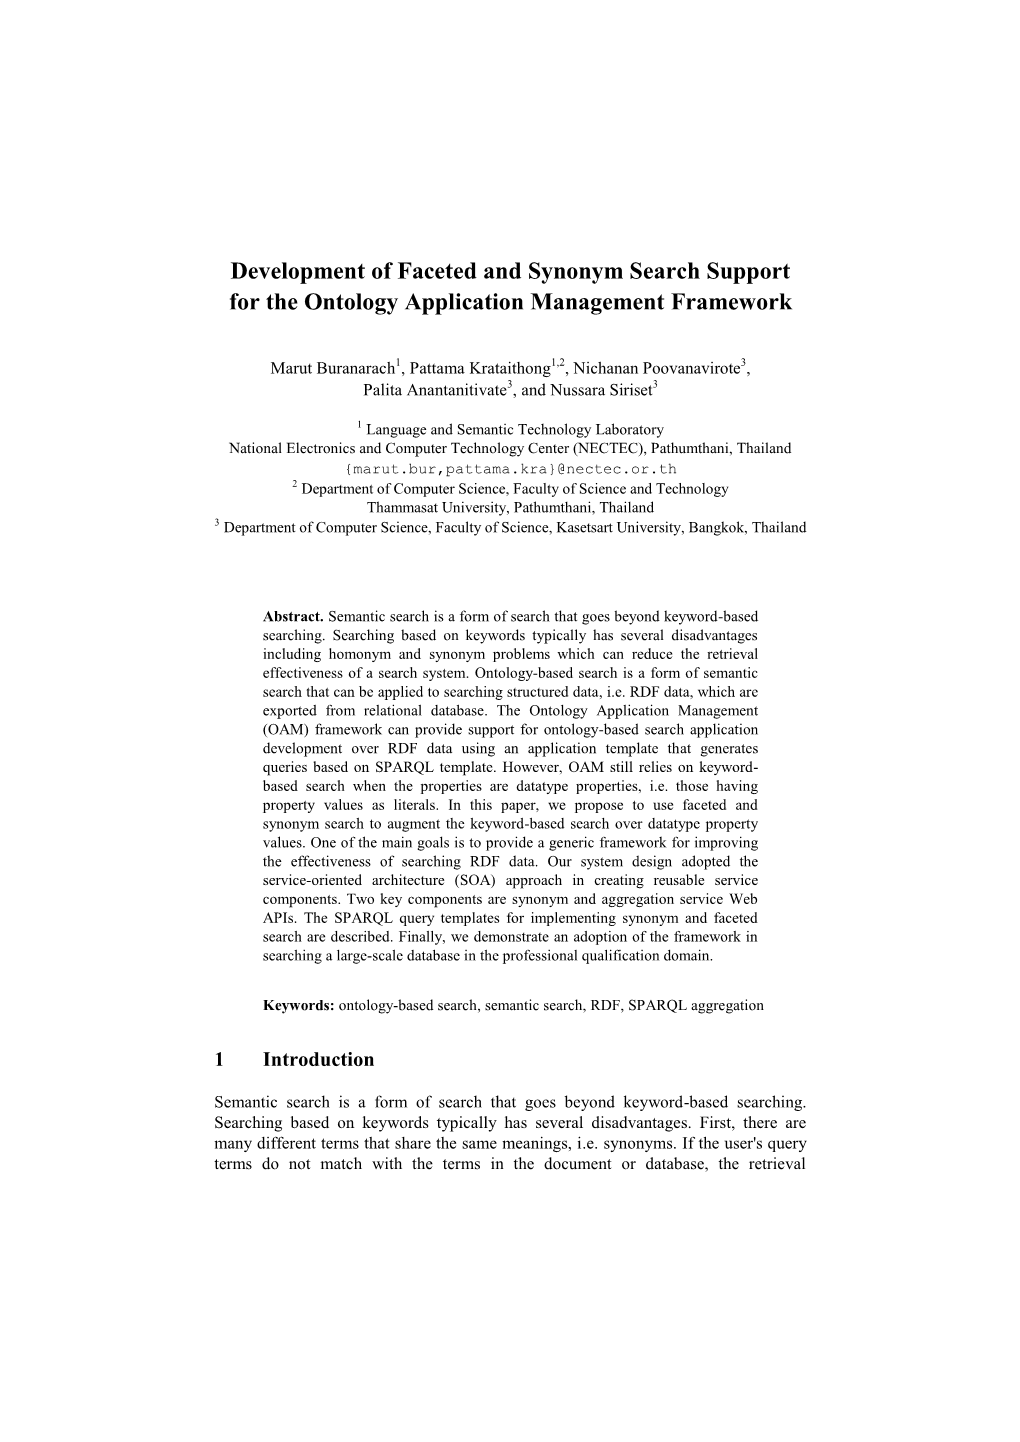 Development of Faceted and Synonym Search Support for the Ontology Application Management Framework